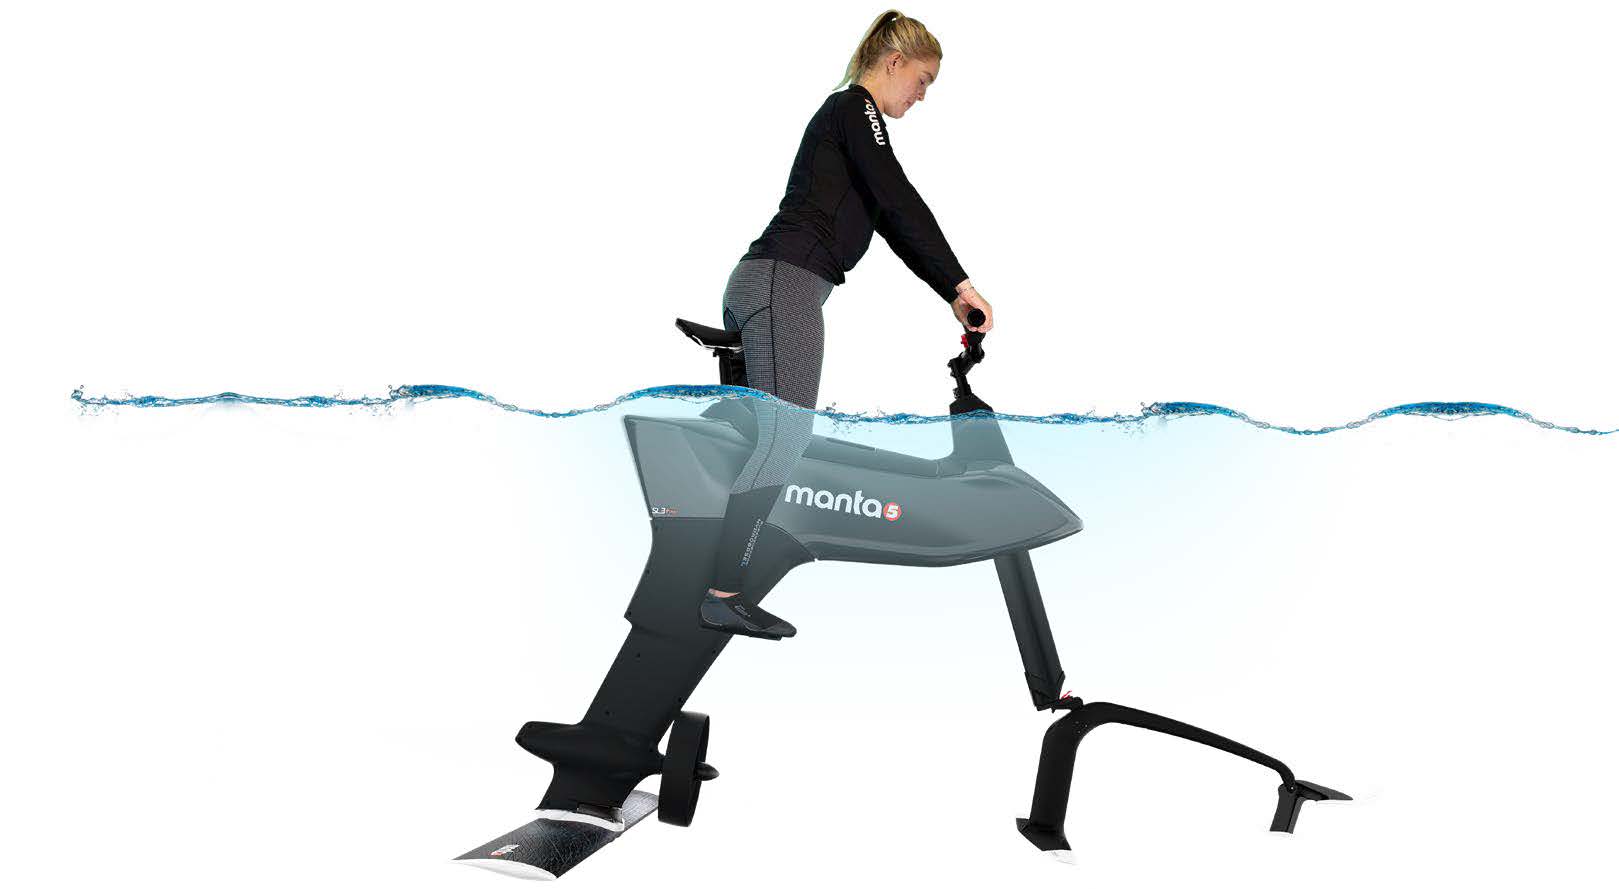 Diagram with a girl preparing to launch the hydrofoiler SL3 water bike